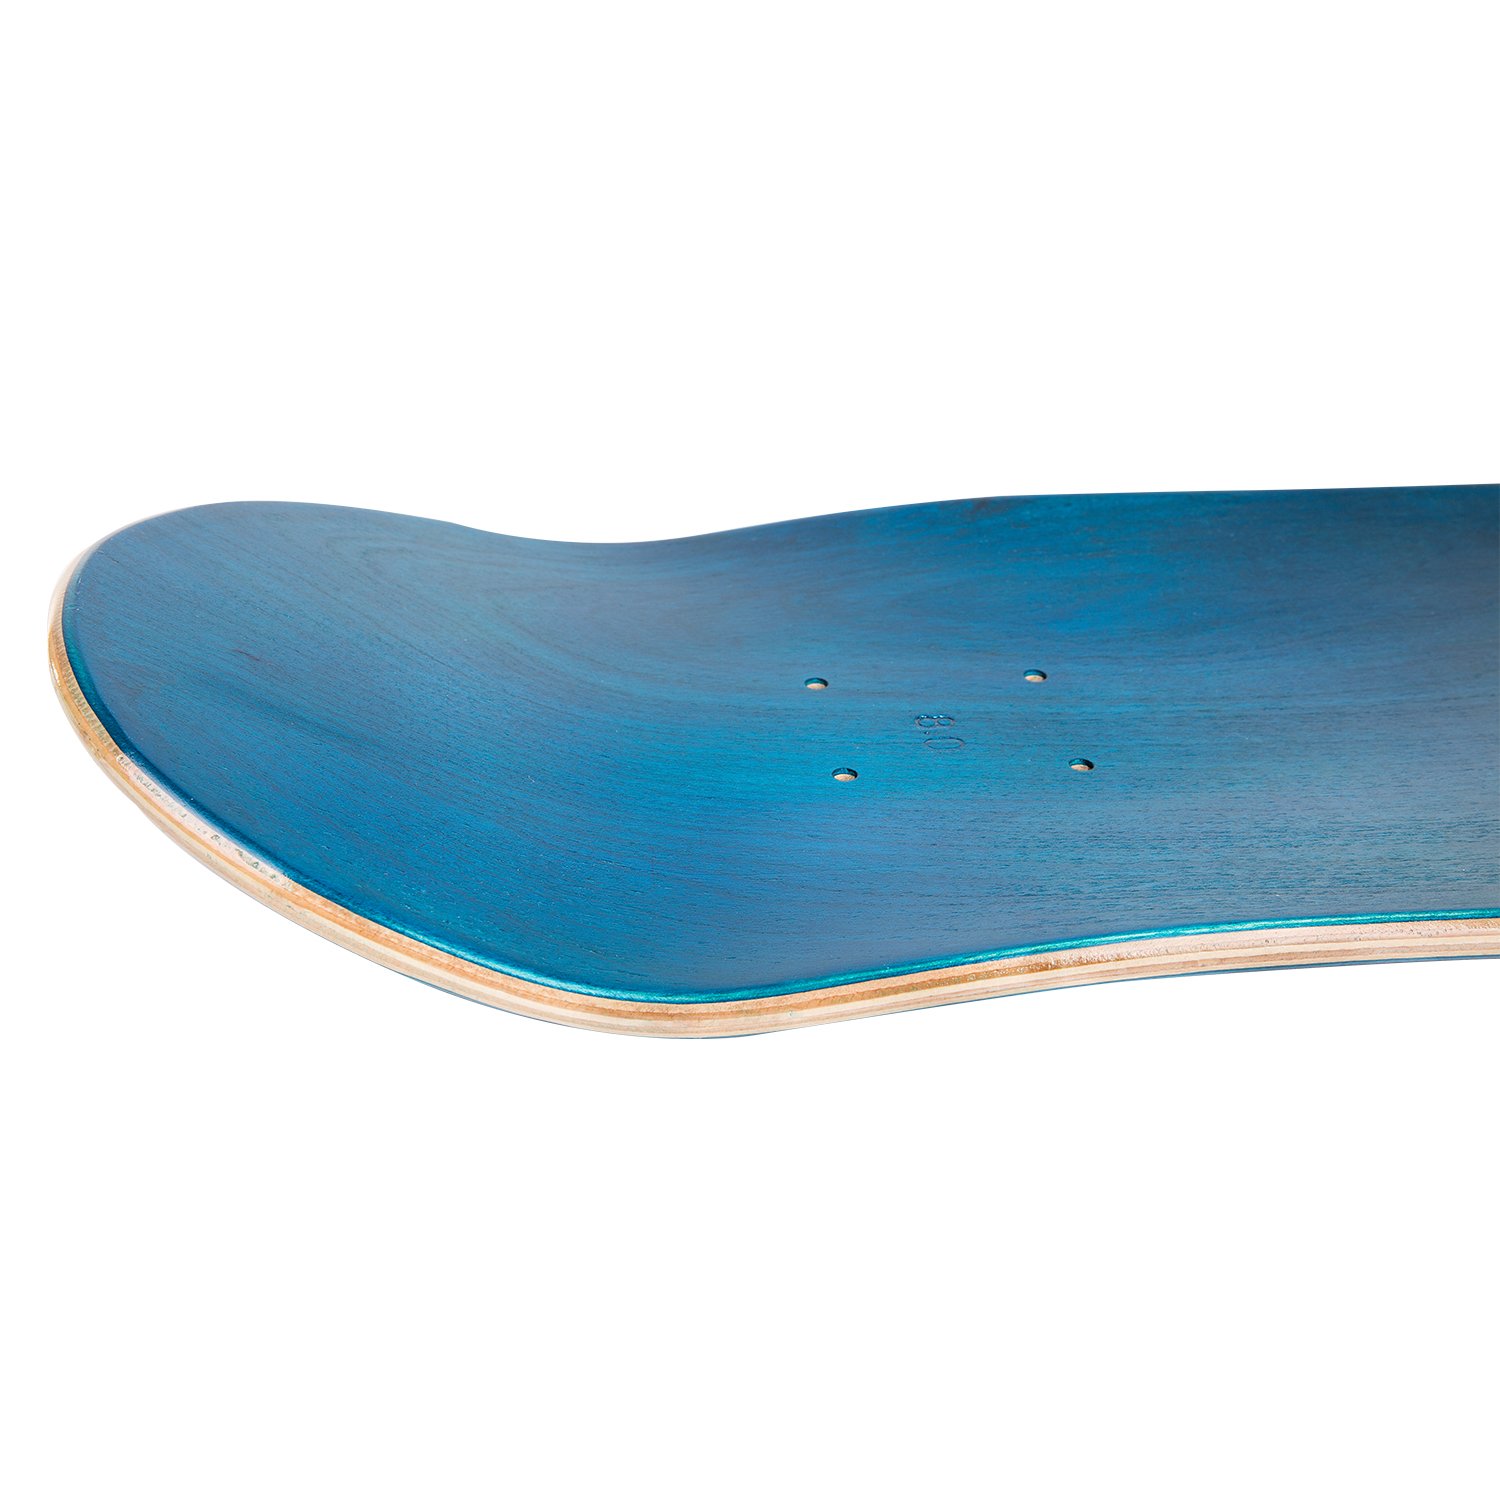 Cal 7 Blank Maple Skateboard Deck with Color Grip Tape | 8.5 Inch | Two Pack (Blue) - image 3 of 3